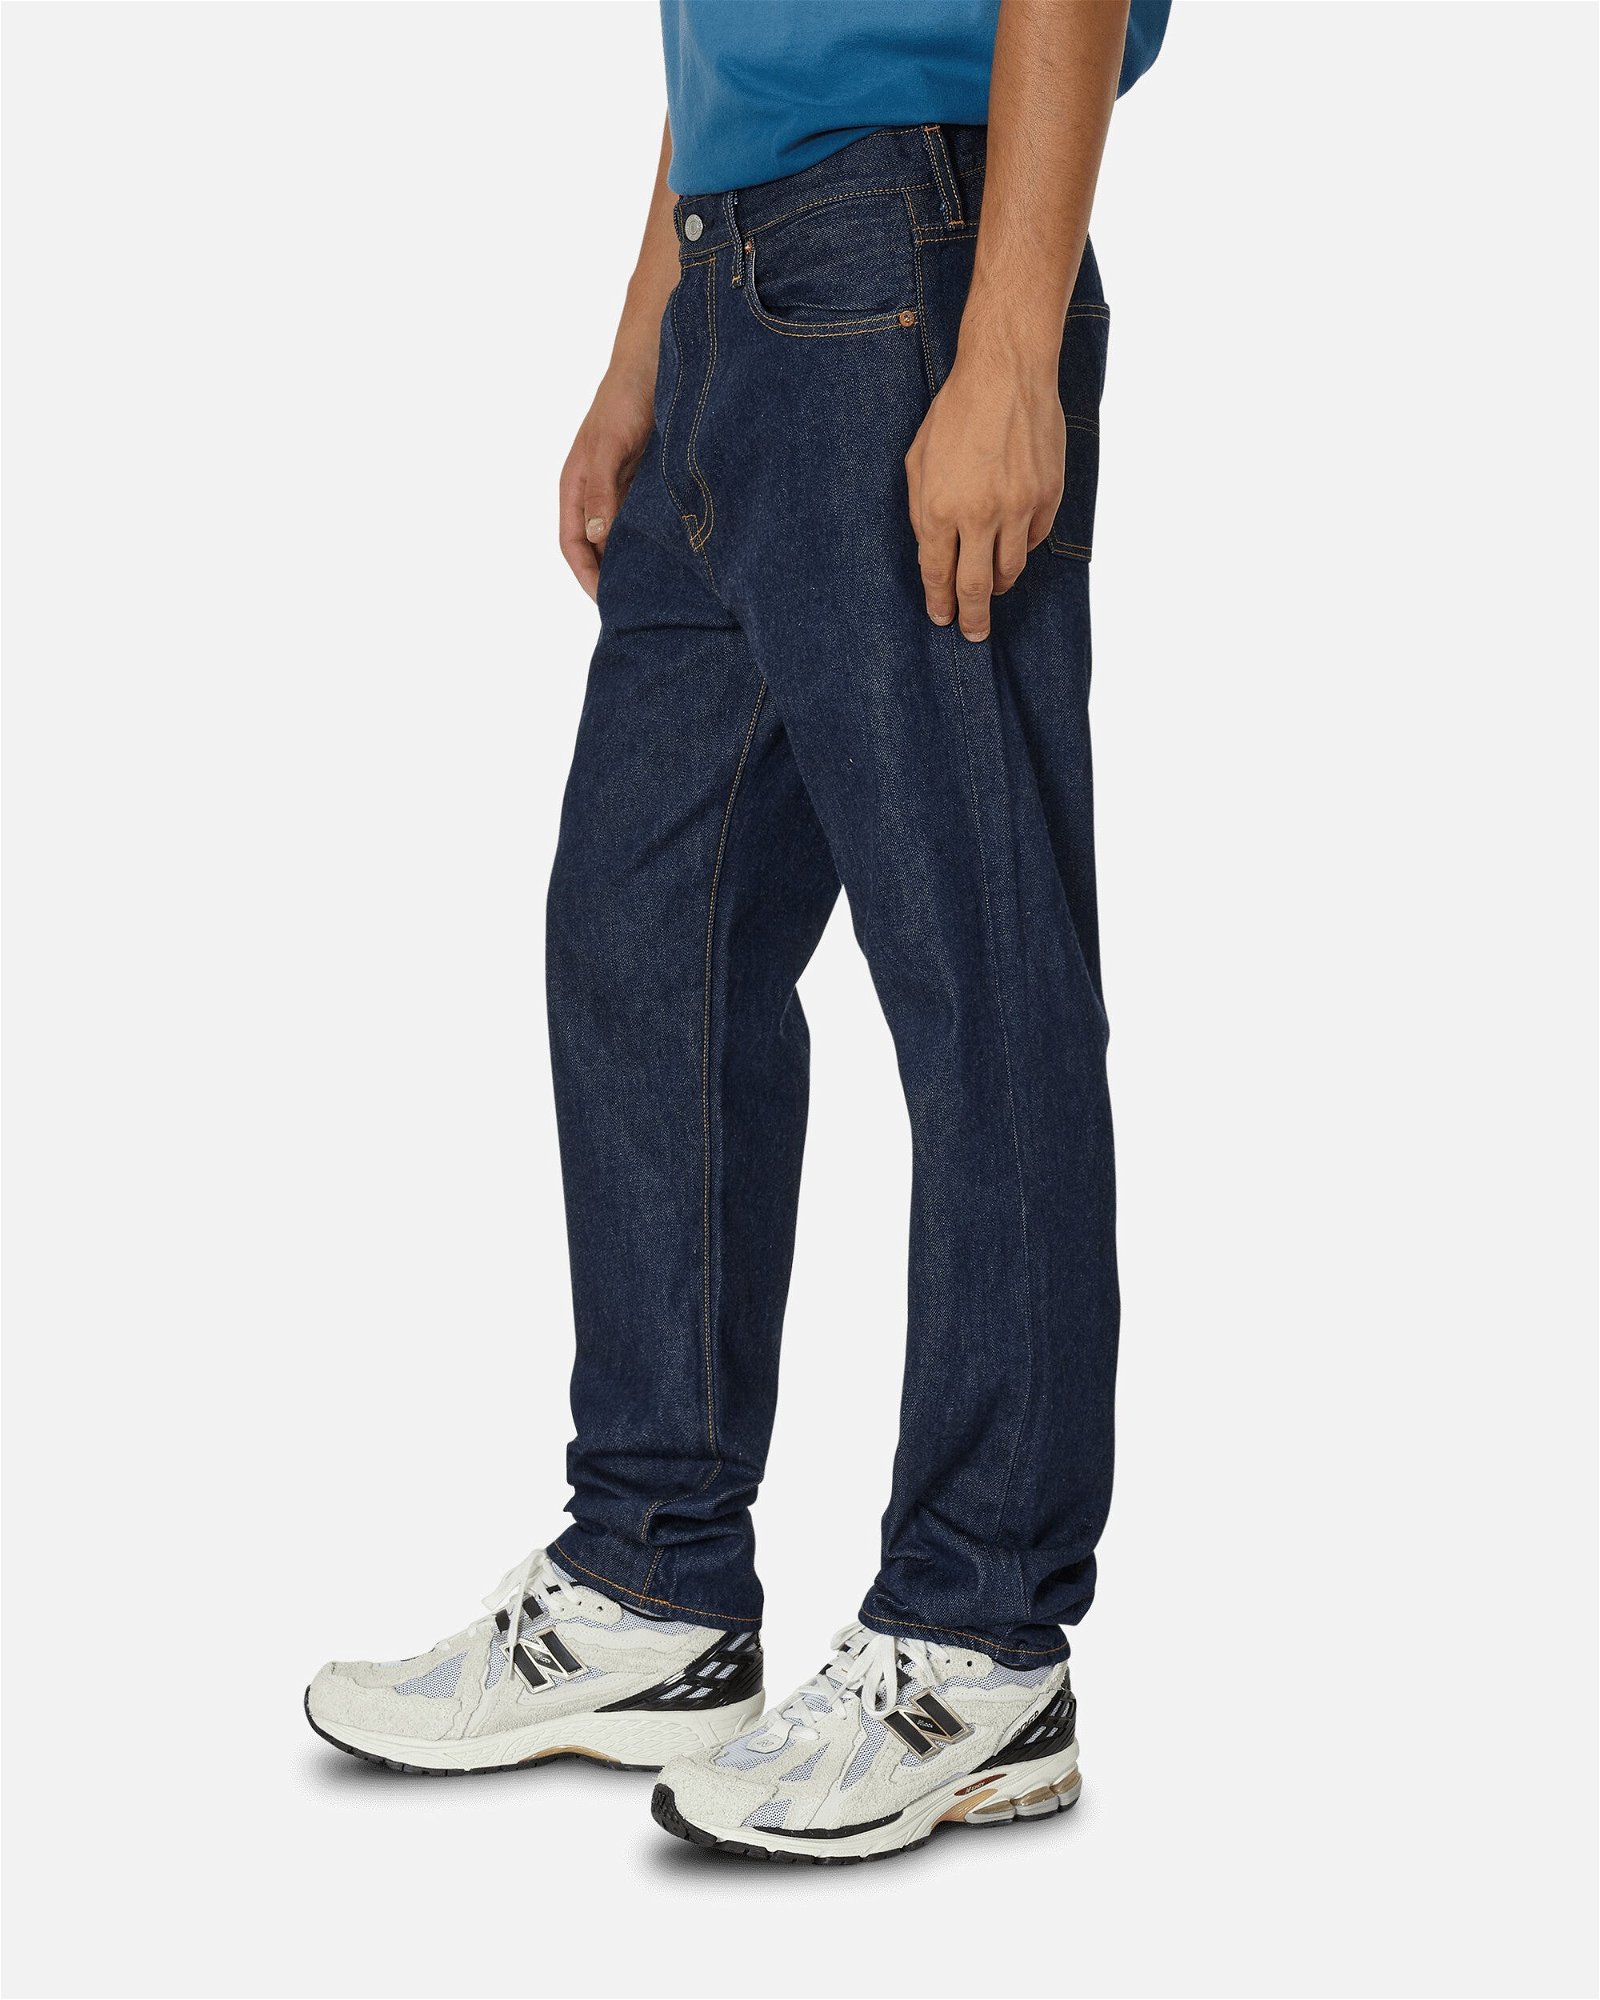 Jeans Levi's Made in Japan 1980 s 501® A5875 0000 | FLEXDOG